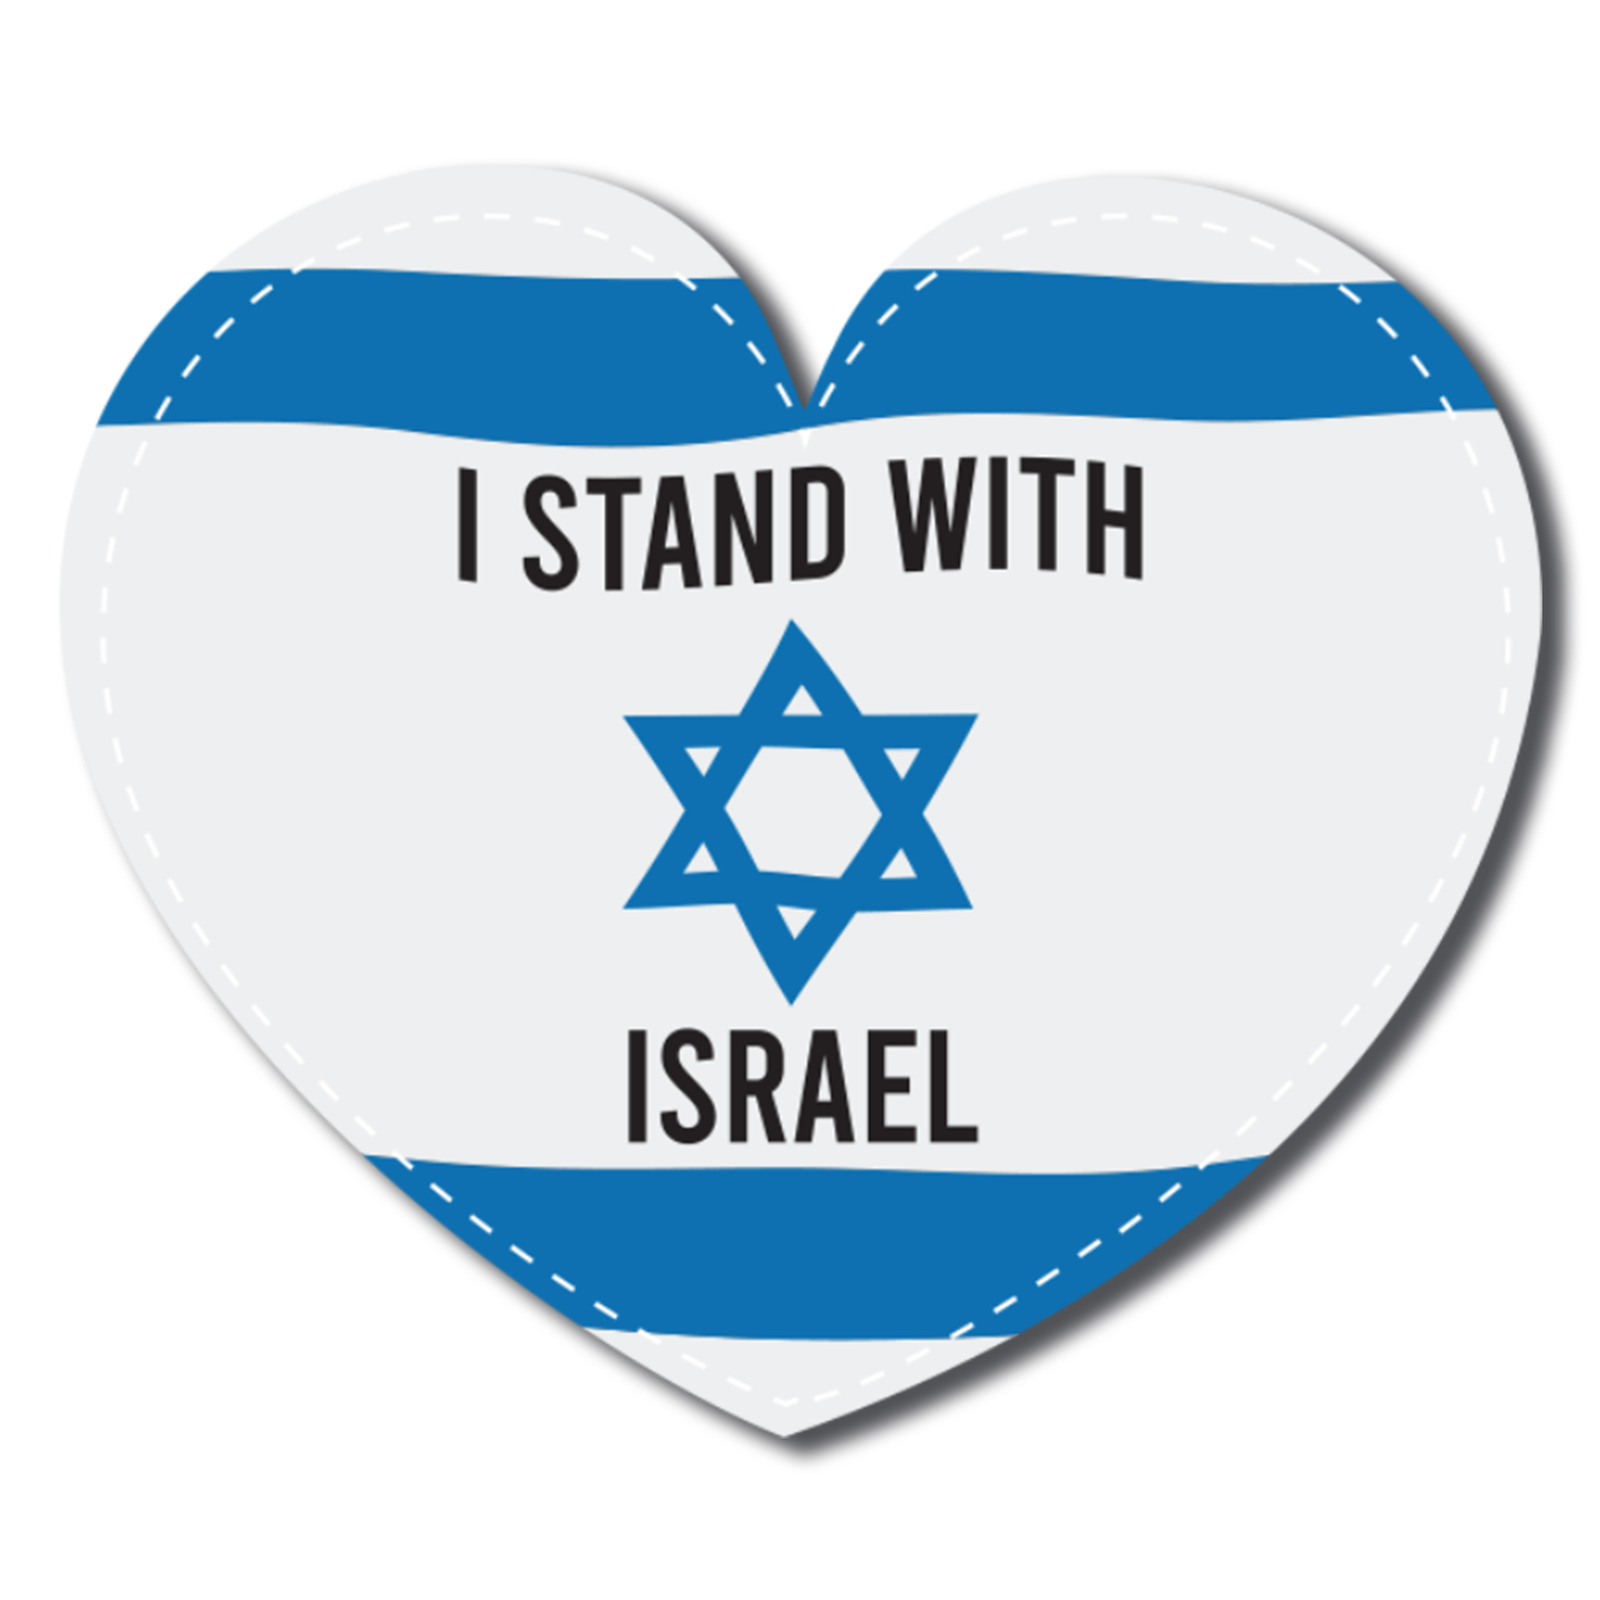 I Stand With Israel, Israeli Support Flag Heart Magnet, 5x4 inches, Automotive